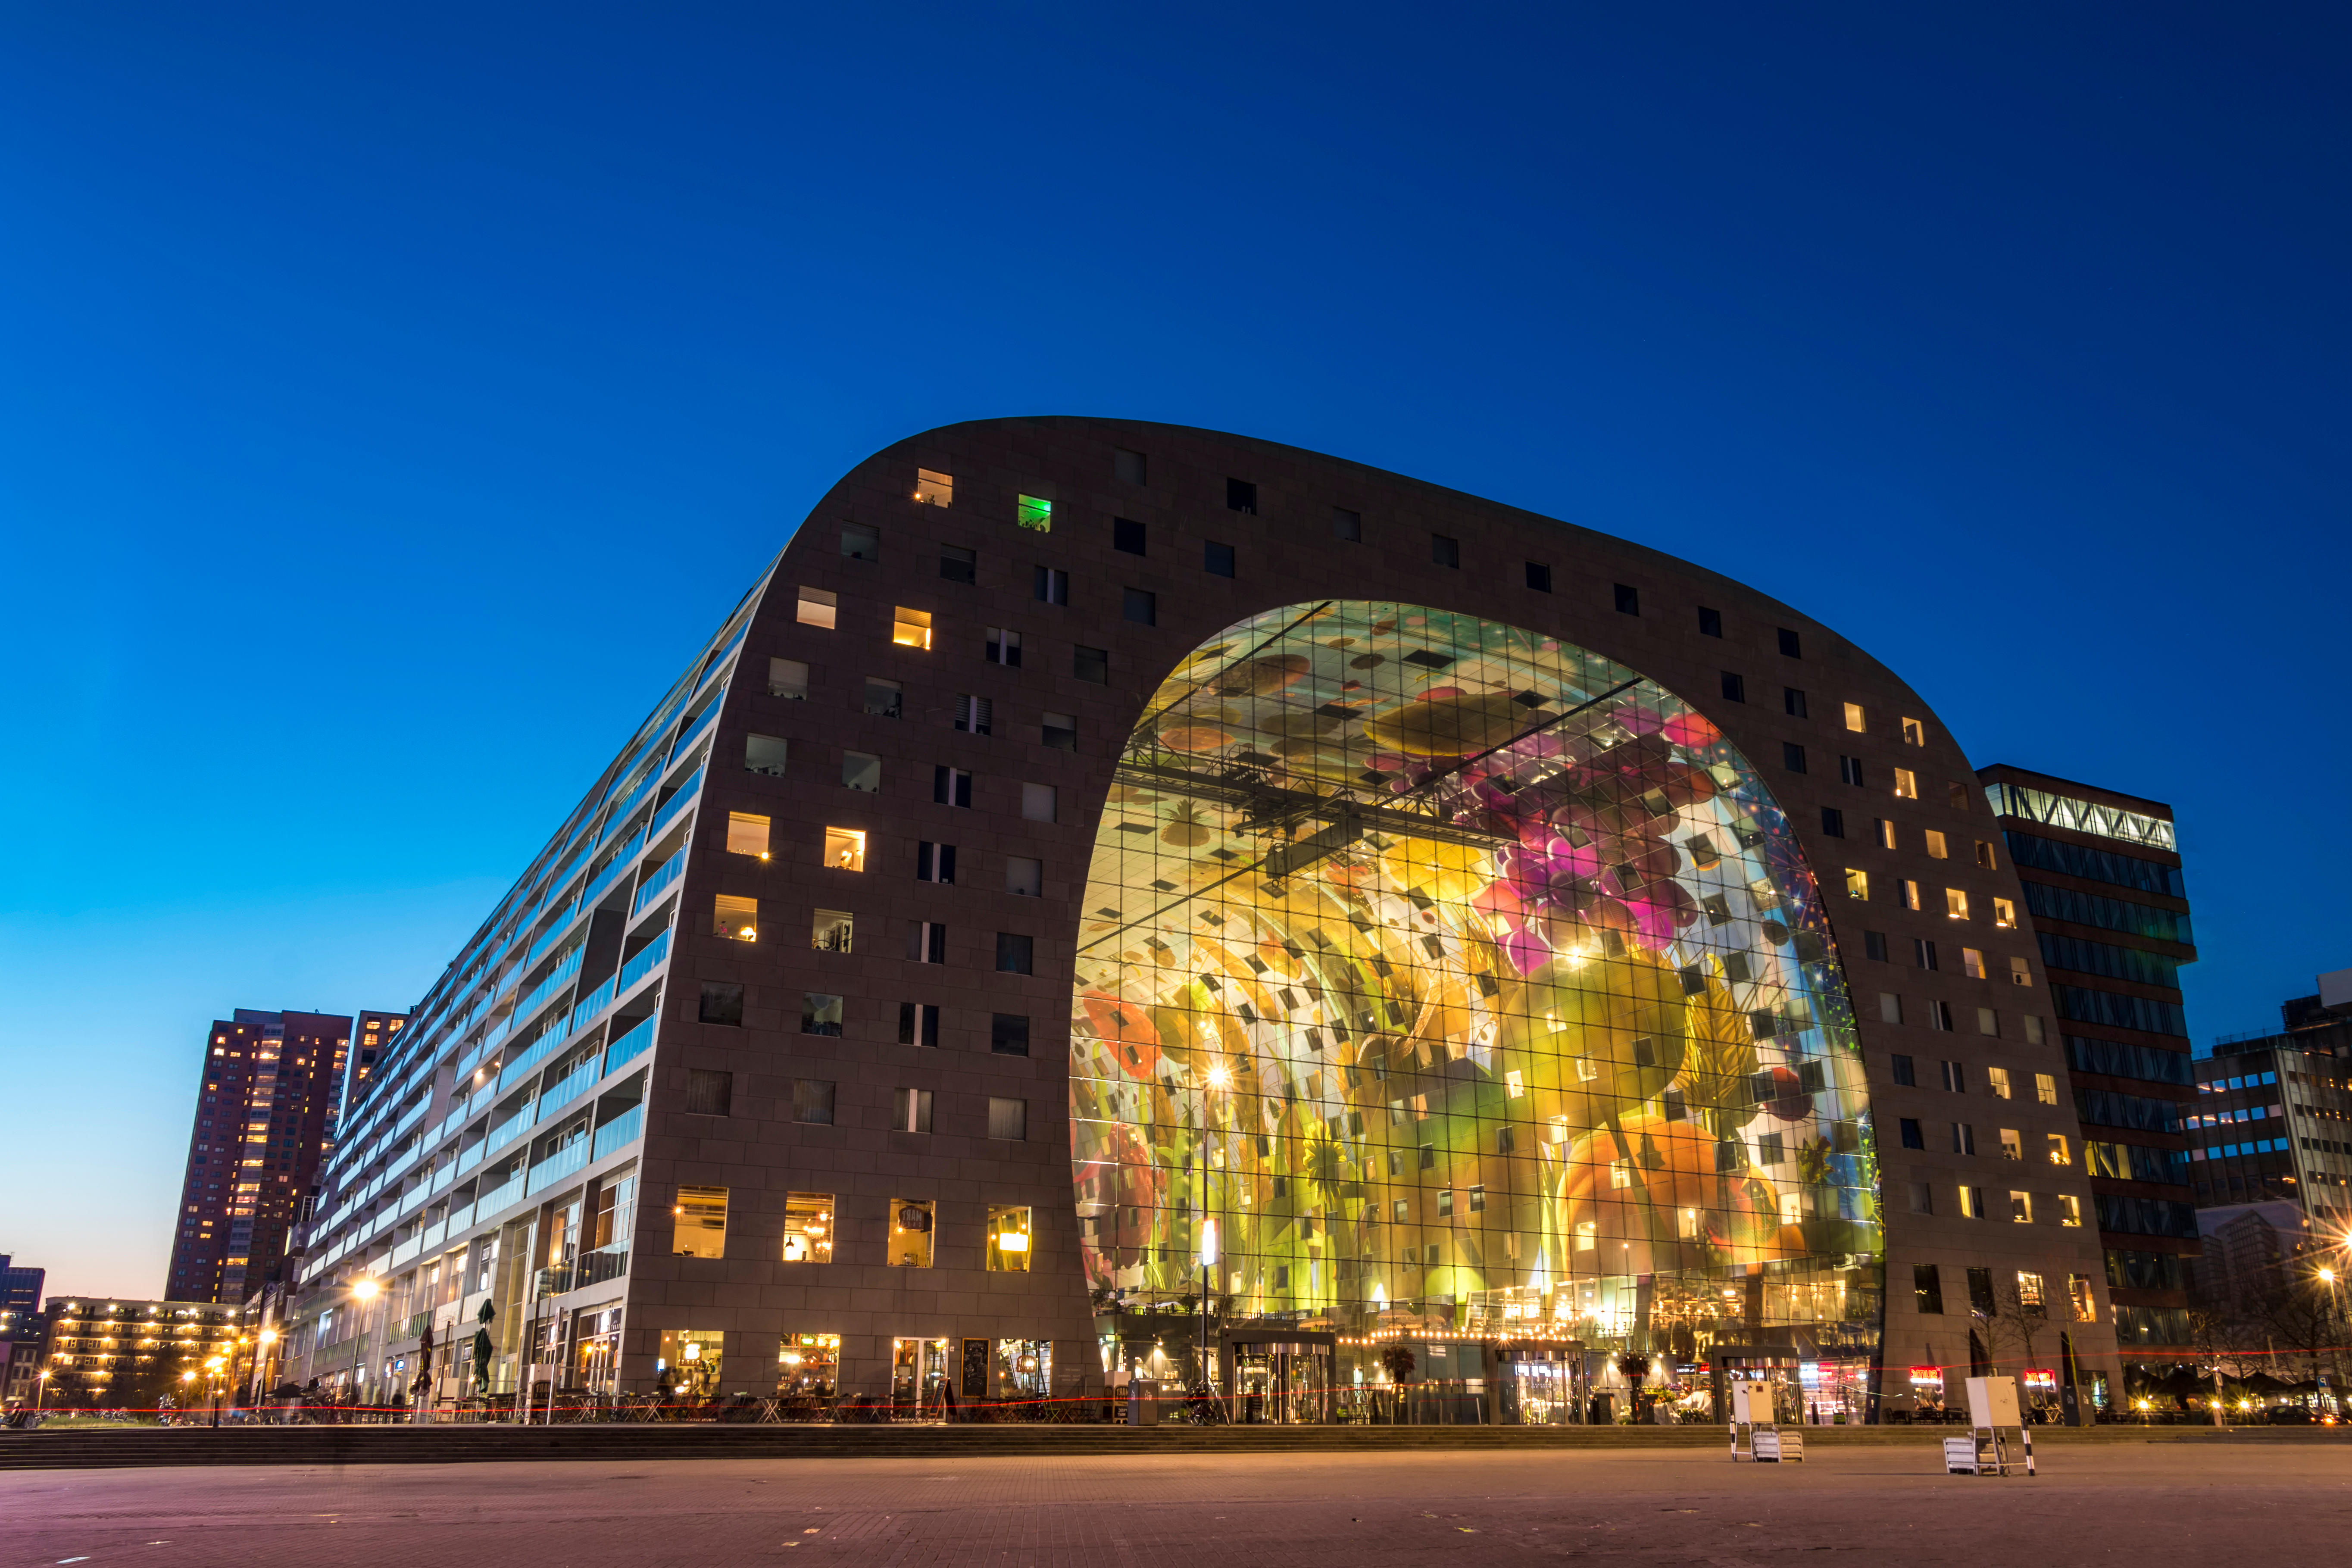 The futuristic-looking Markthal is a foodies dream